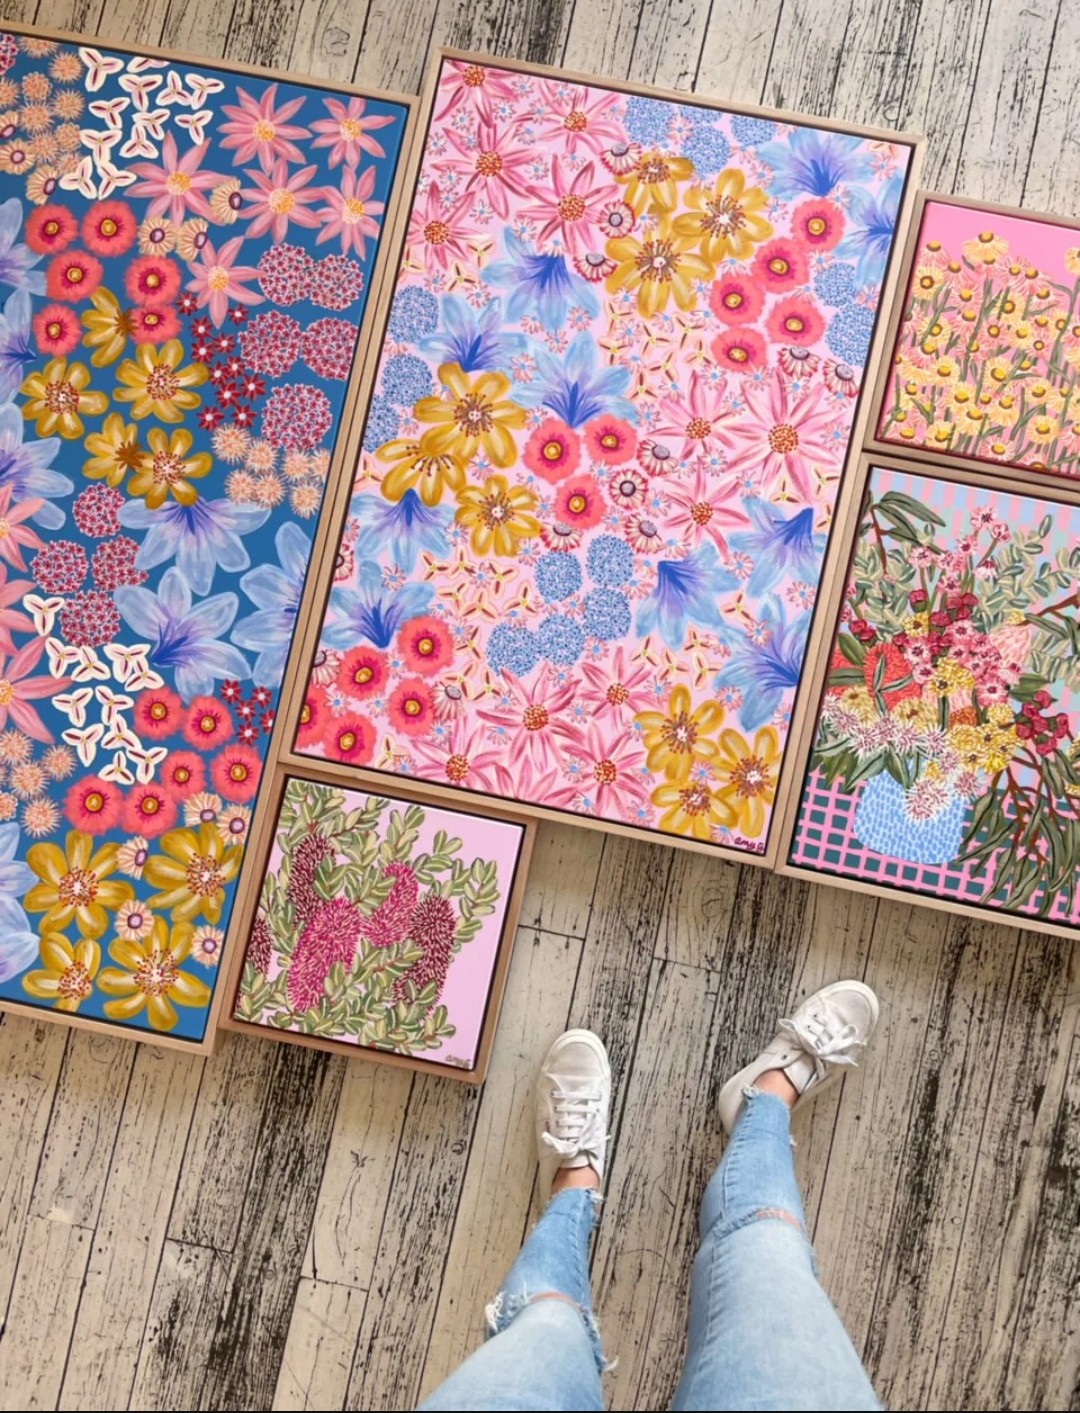 Collection of floral artworks on floor by Amy Gibbs